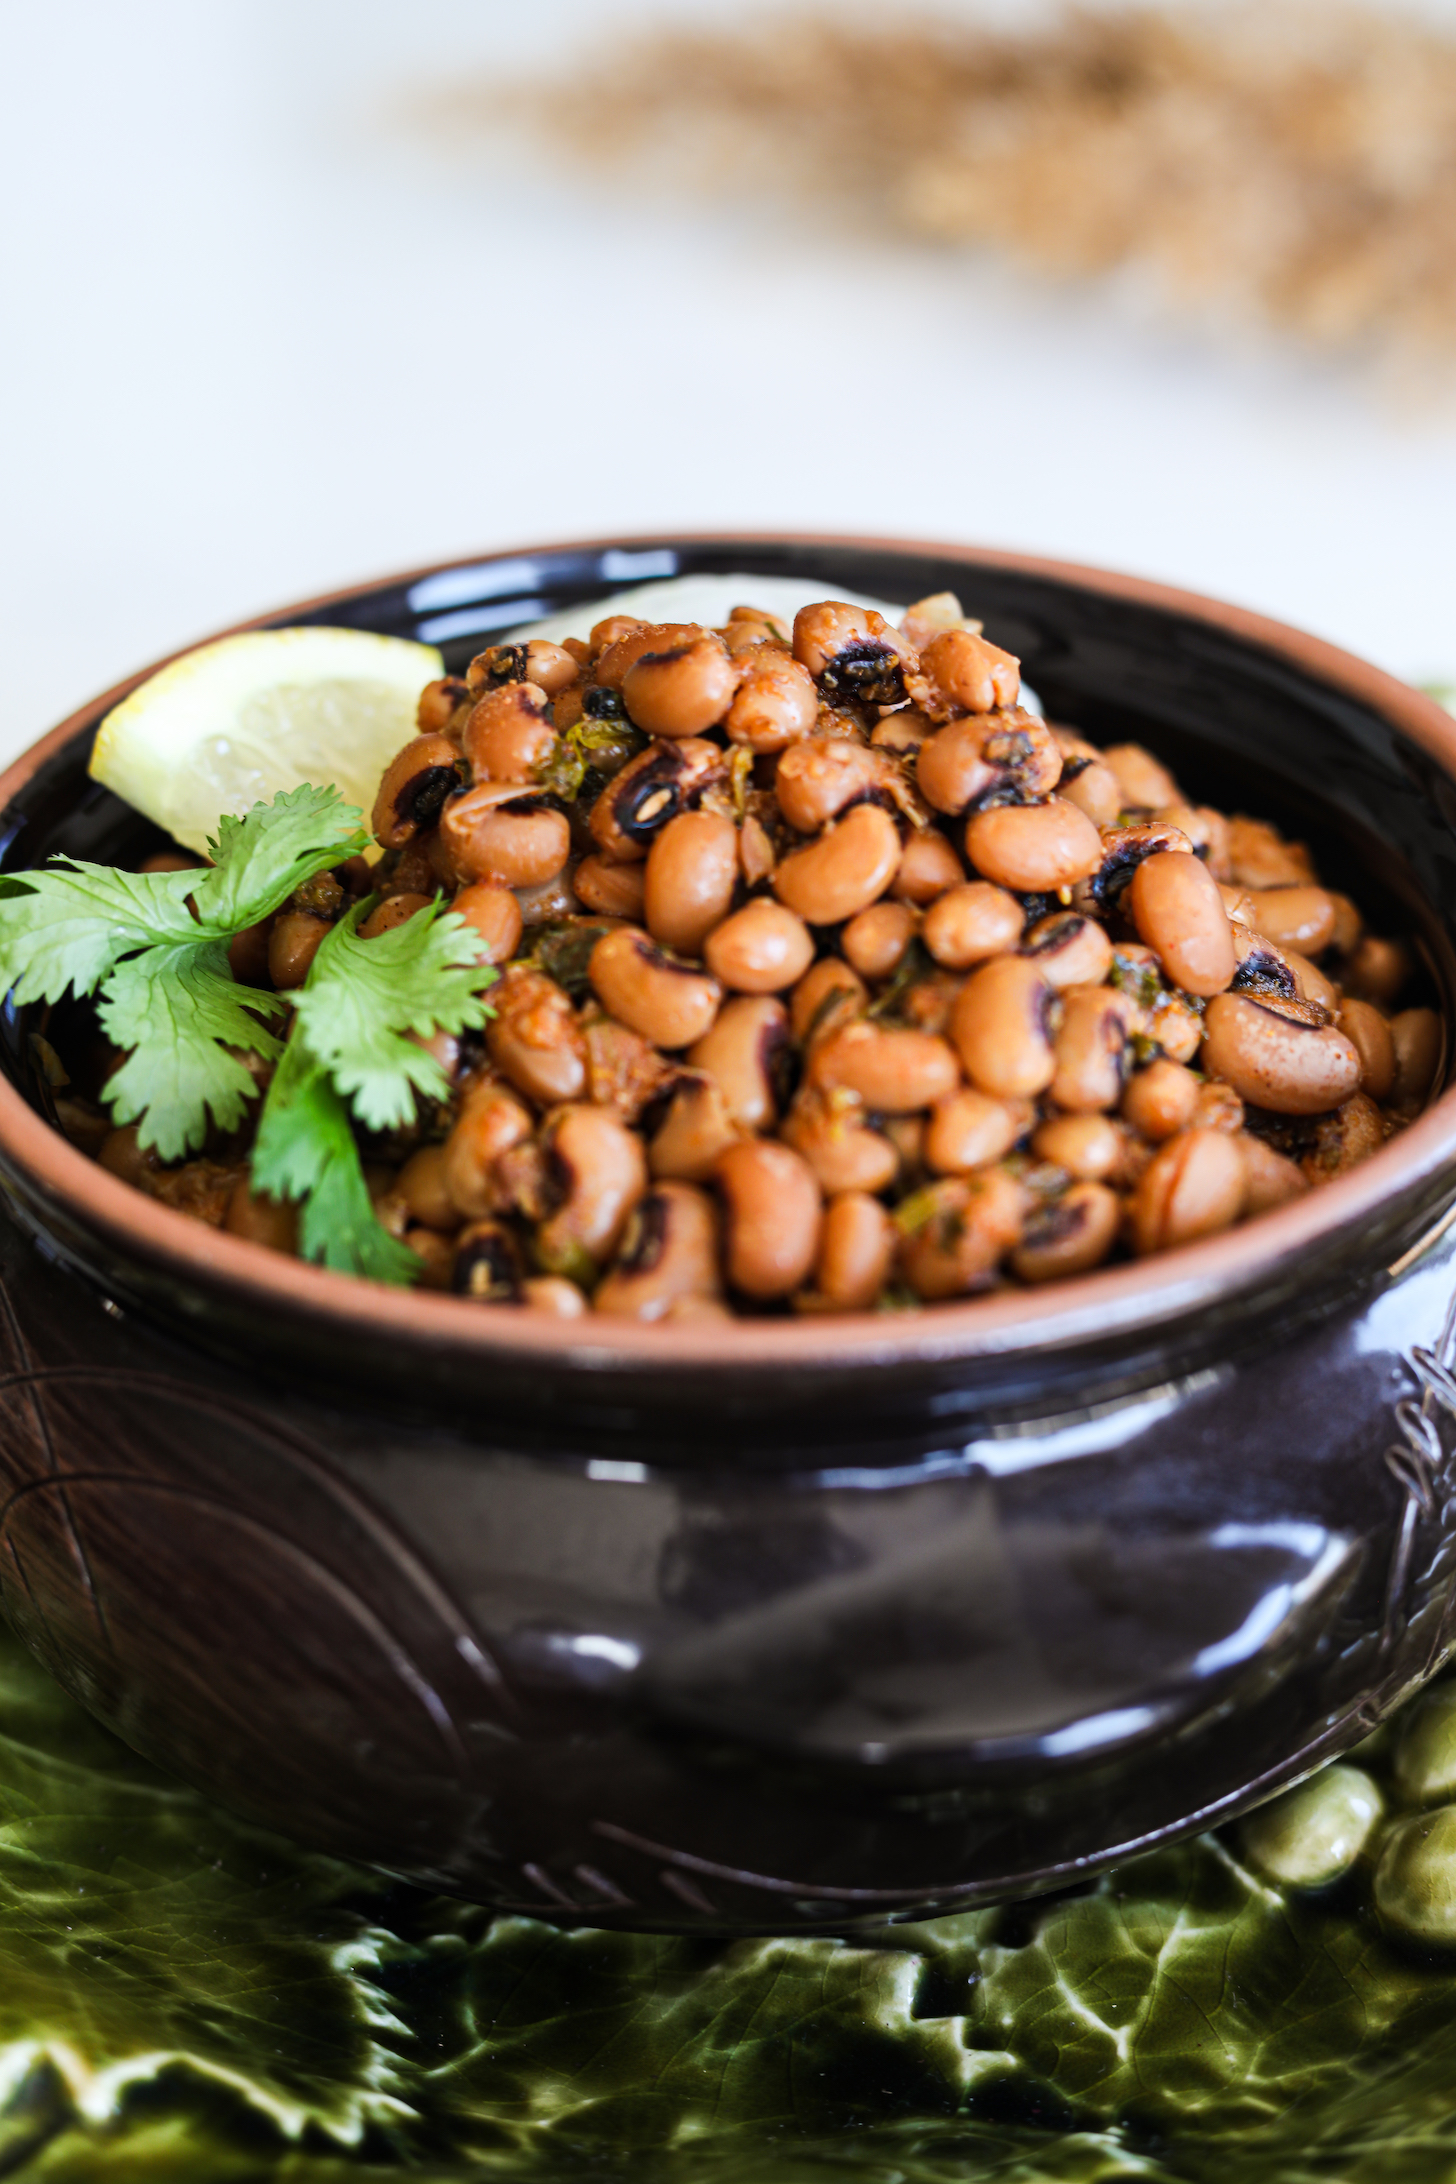 A perspective image of black eyed peas, aka lobia curry served in a clay pot topped with lemon segments and cilantro.